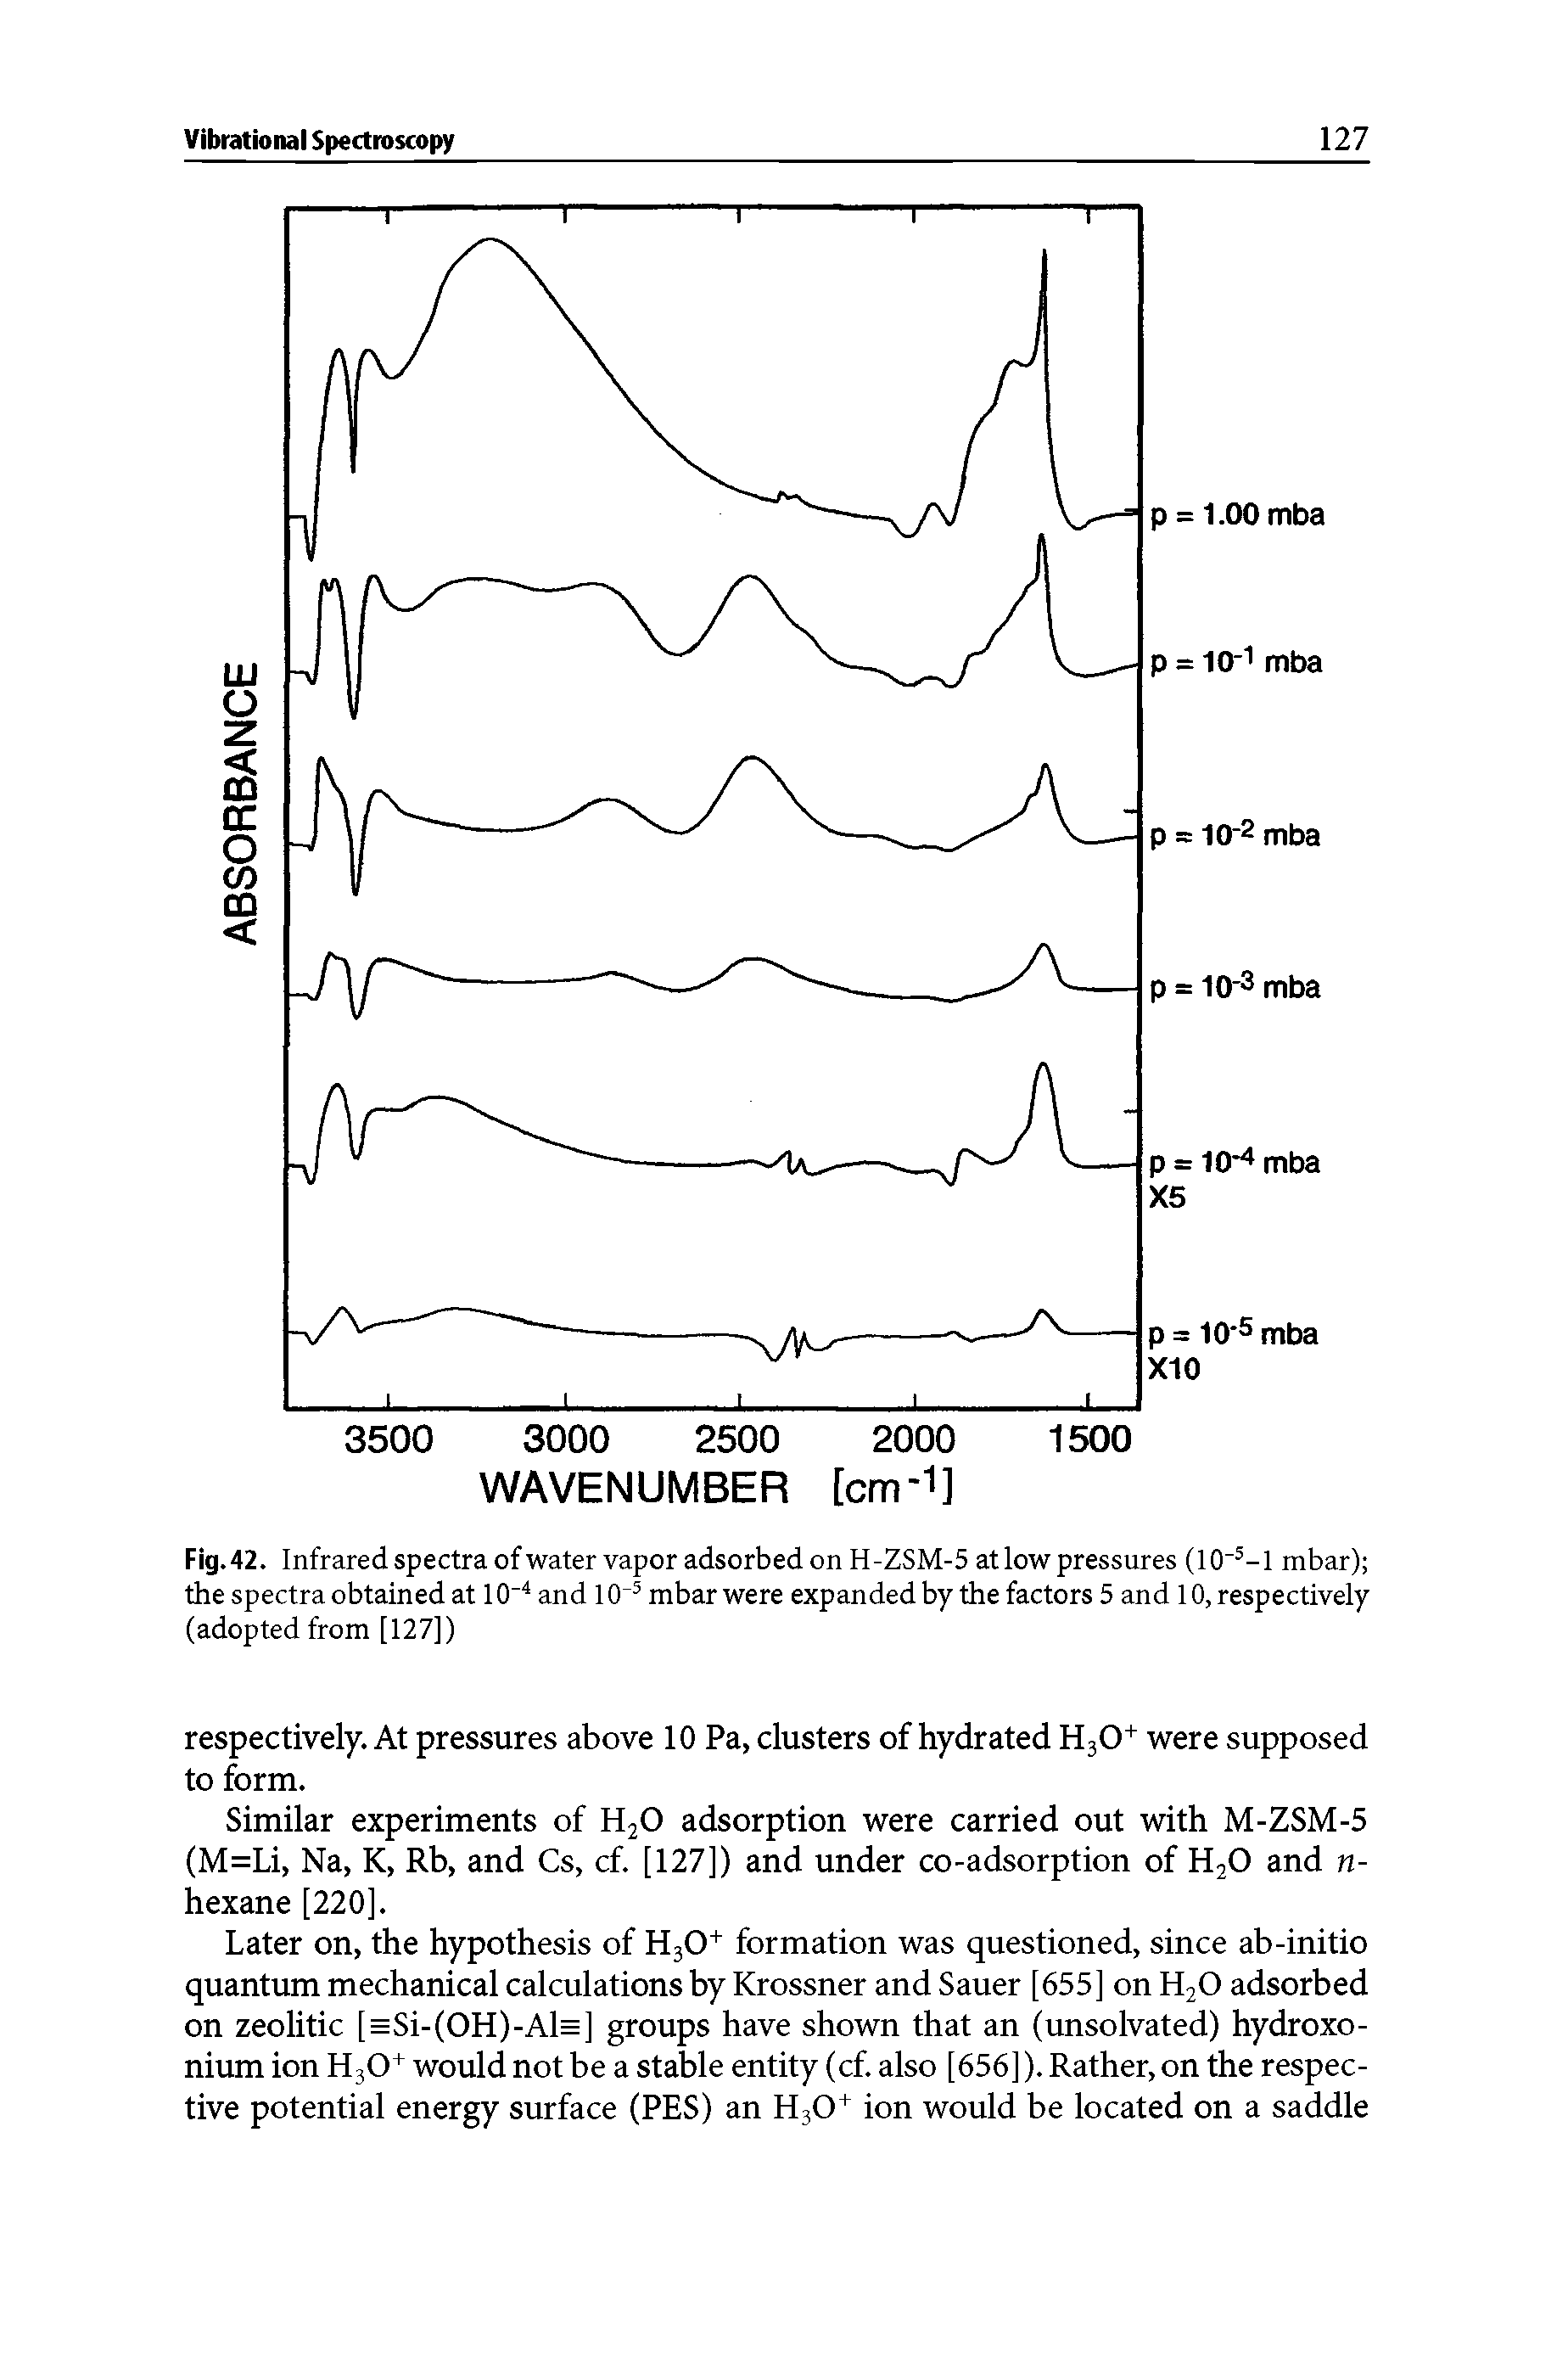 Fig. 42. Infrared spectra of water vapor adsorbed on H-ZSM-5 at low pressures (10 -1 mbar) the spectra obtained at 10" and 10 mbar were expanded by the factors 5 and 10, respectively (adopted from [127])...